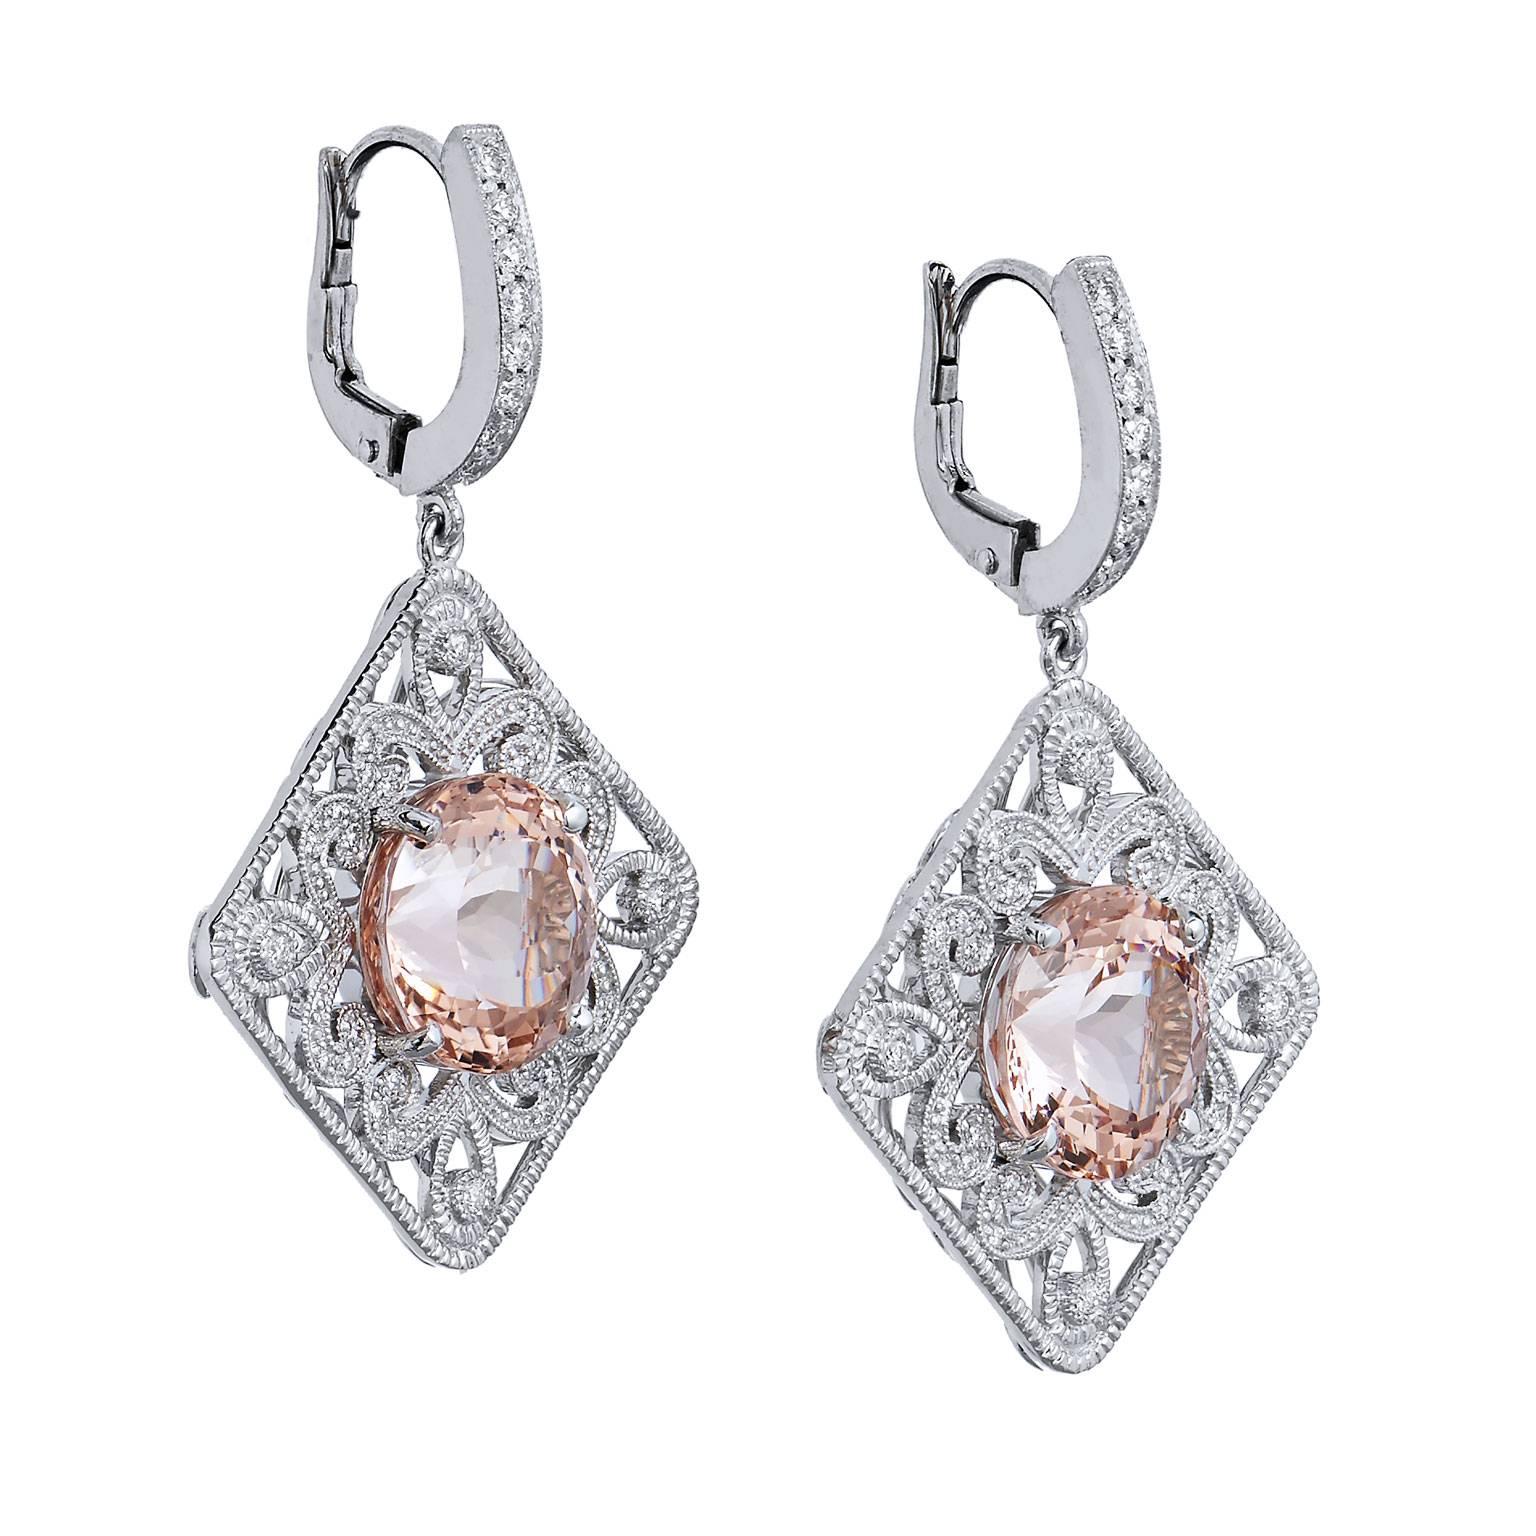 Revel in the joy of morganite and diamonds in these handmade H and H drop lever-back 18 karat white gold earrings. Two prong-set morganites, with a total weight of 10.03 carat, are positioned at center- bursting with luscious elegance. Decorative